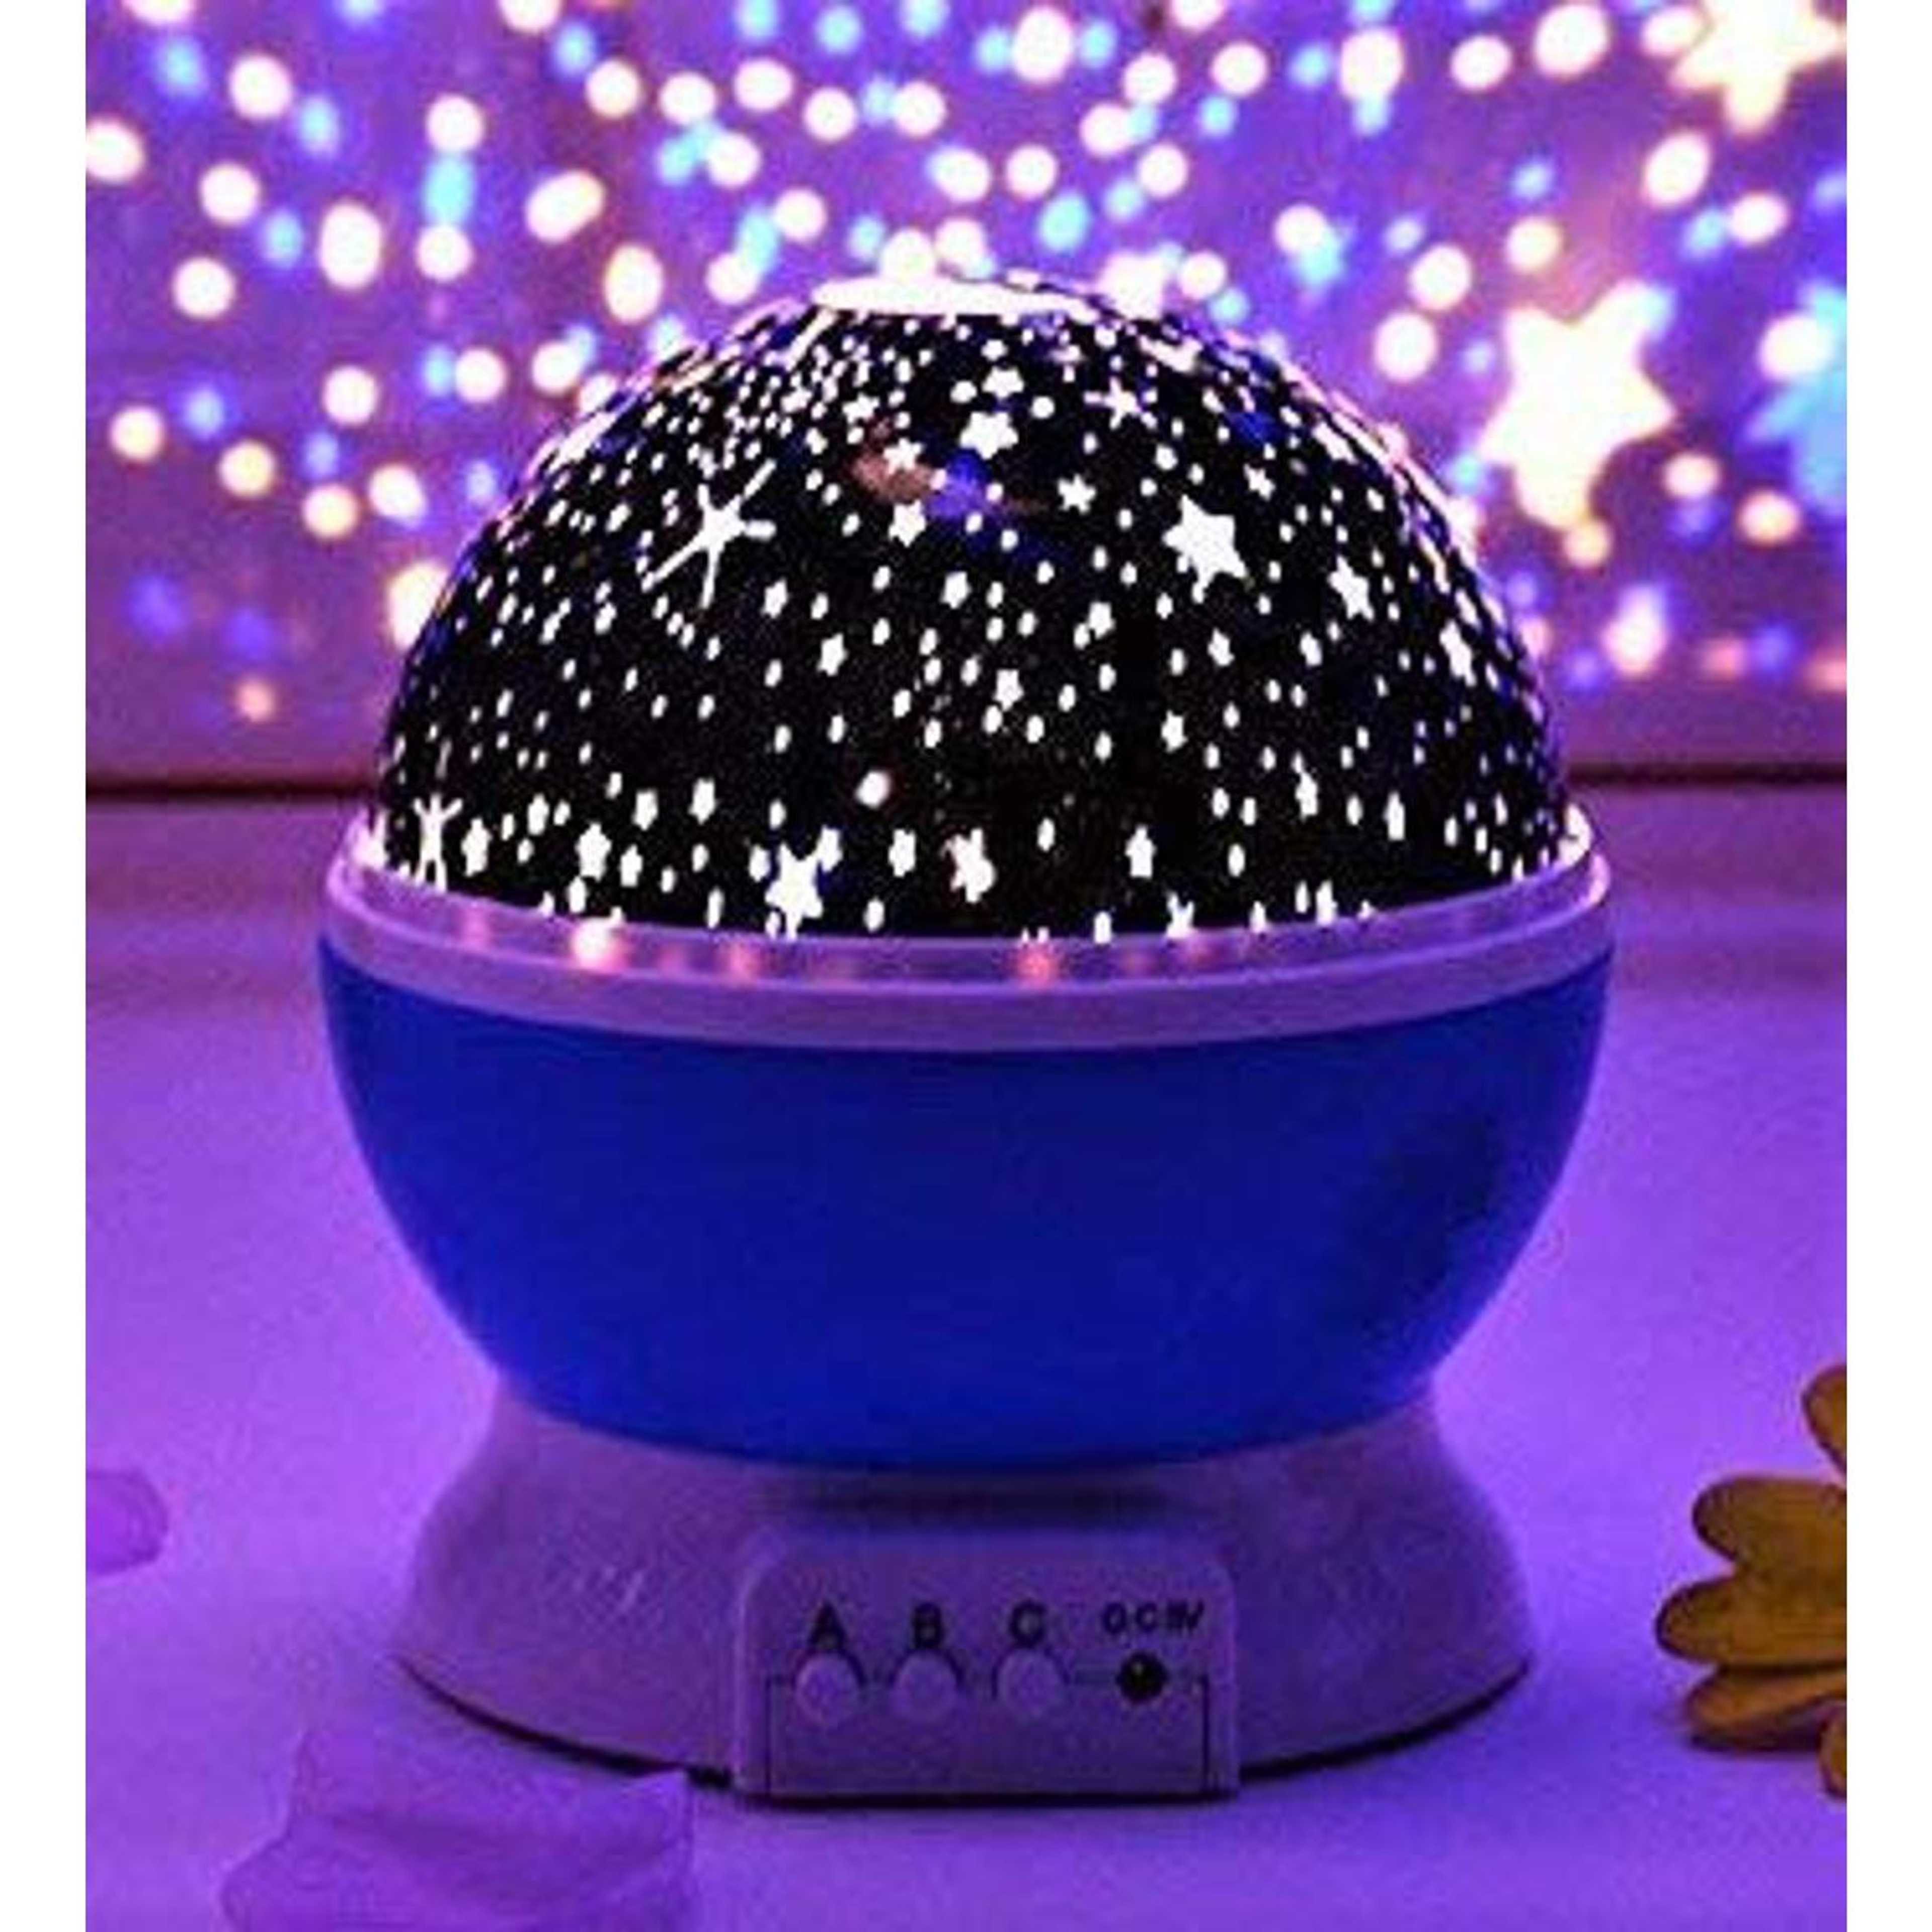 Baby Night Lights, Moon Star Night Light Rotating Star Projector, Baby Night Light, Night Lighting Lamp 4 LED 8 Modes with USB Cable, Best for Bedroom Nursery Kids Baby Children Birthday Gift,